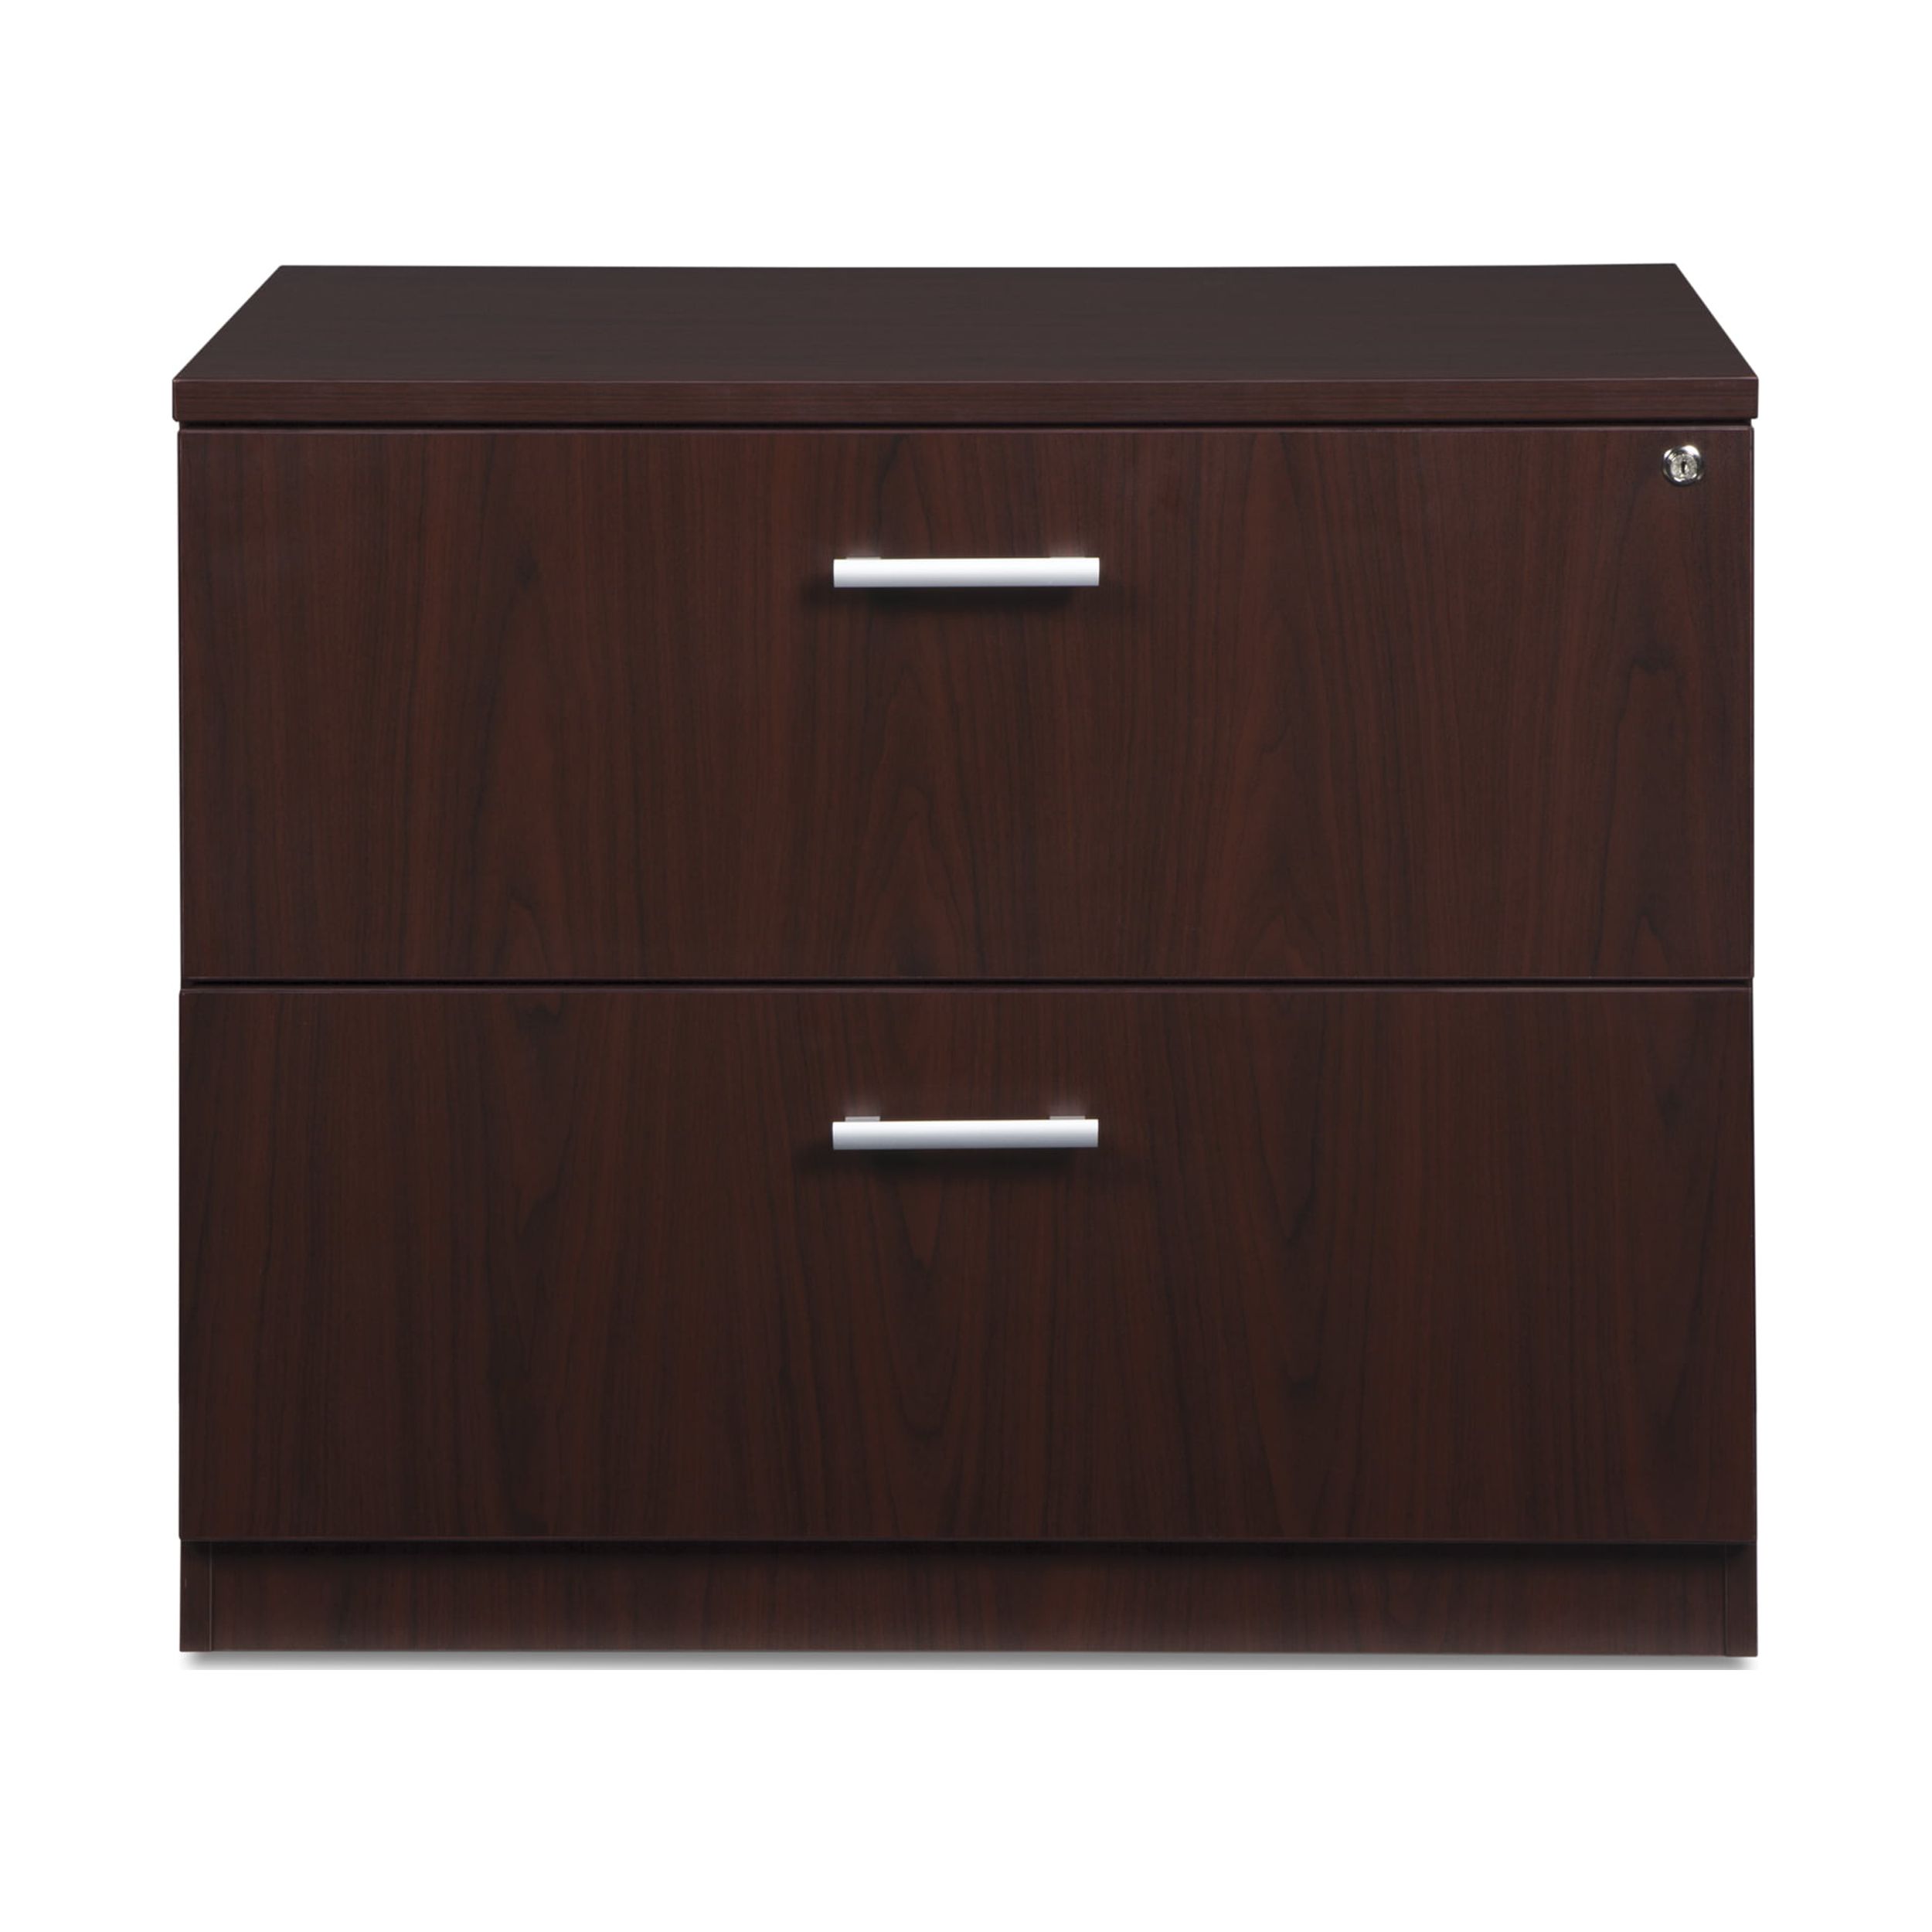 OFM Fulcrum Series Locking Lateral File Cabinet, 2-Drawer Filing Cabinet, Mahogany (CL-L36W-MHG) - image 2 of 9